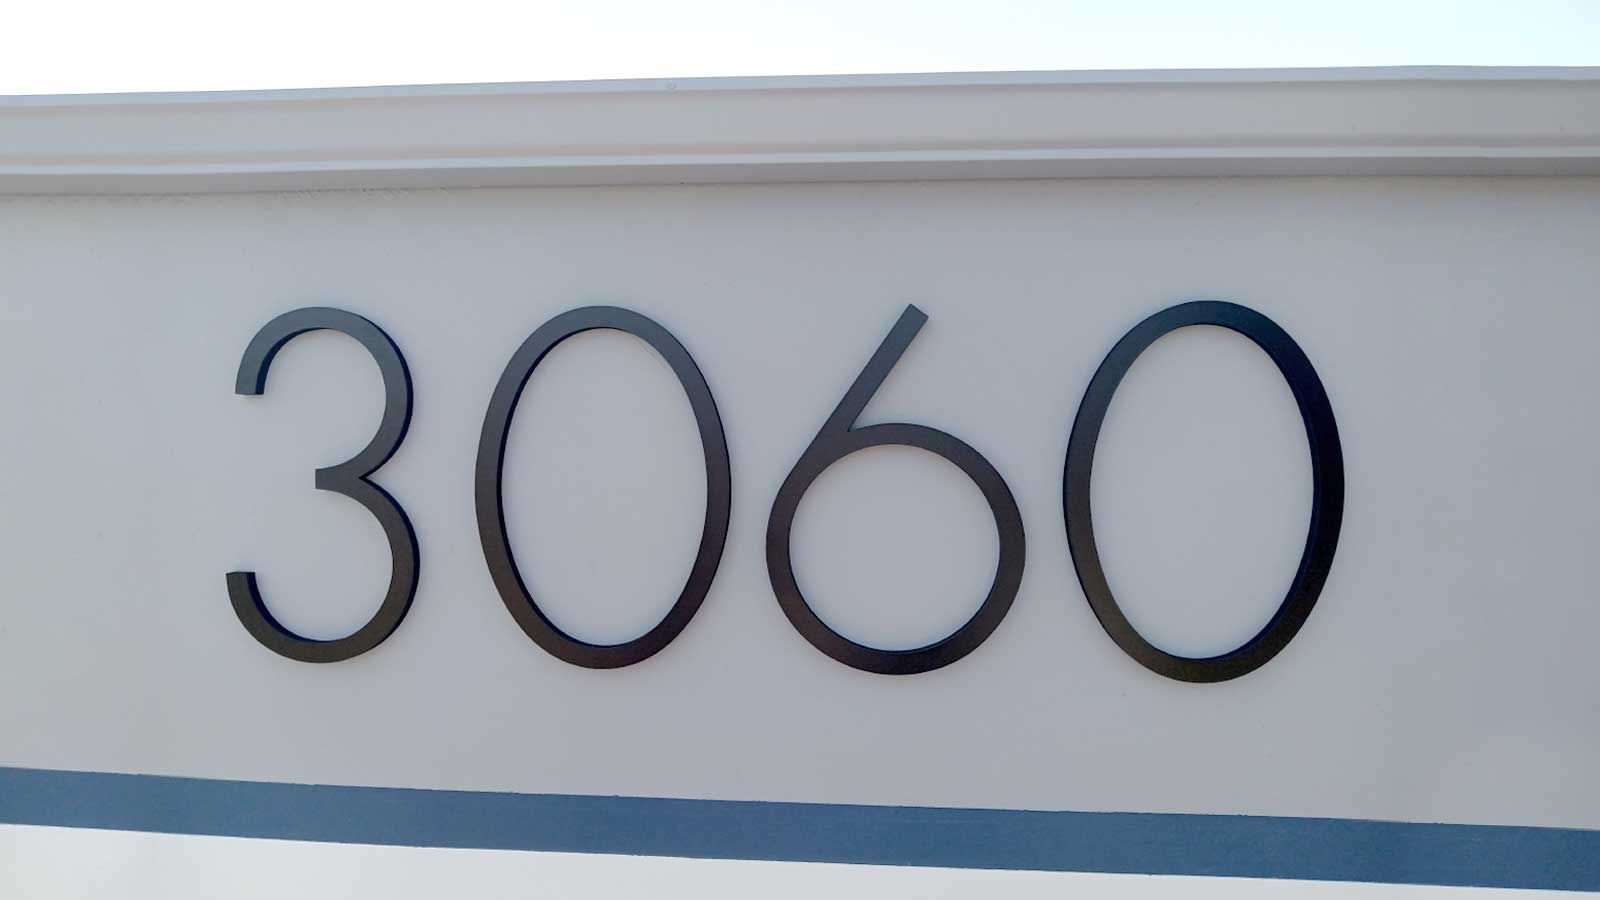 3060 three dimensional address number sign